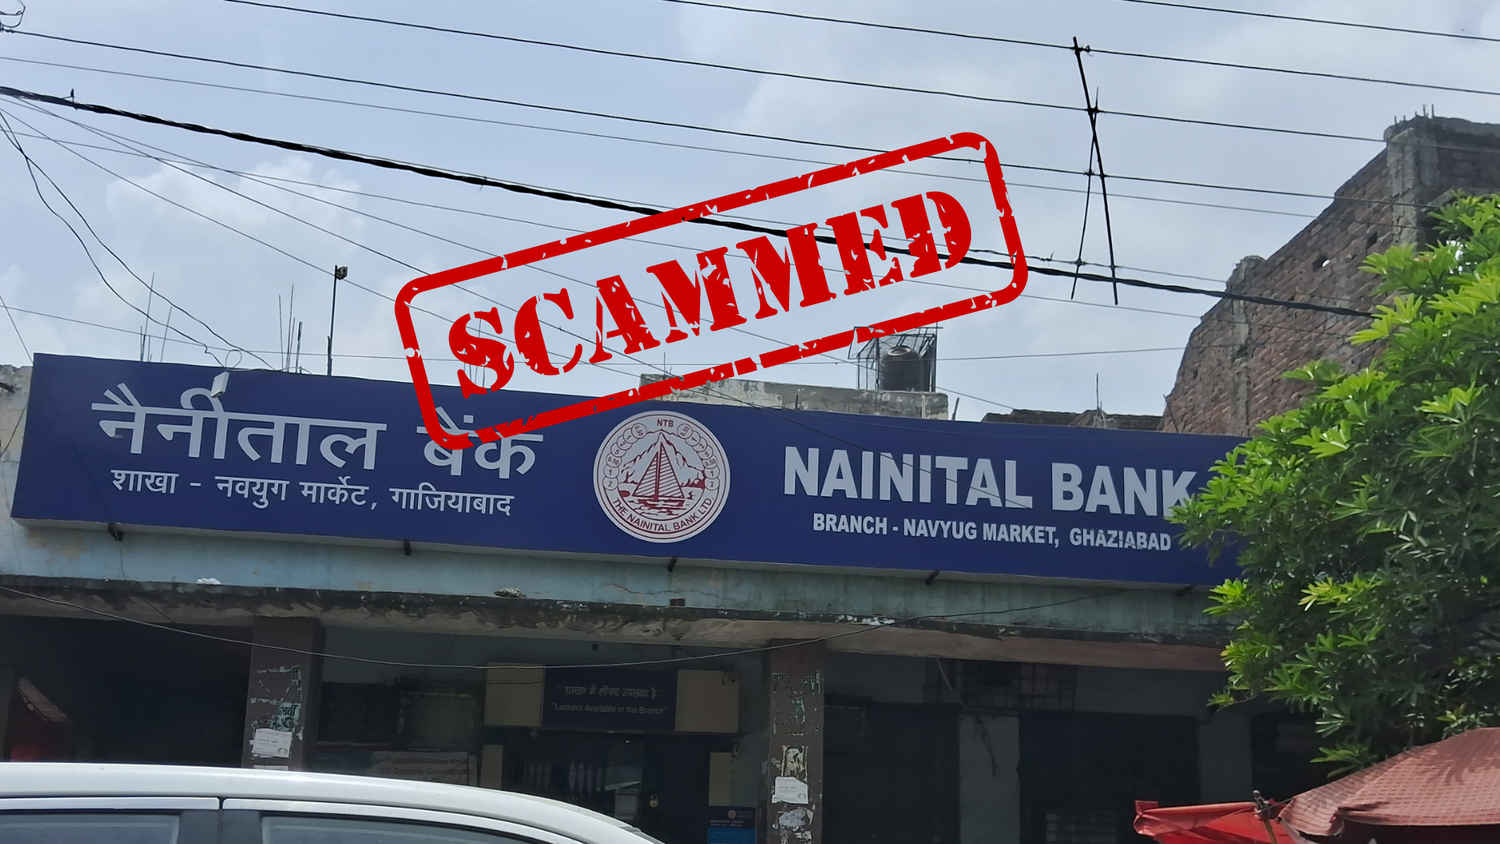 This bank in Noida lost over Rs 16 crore to an online scam: Details here